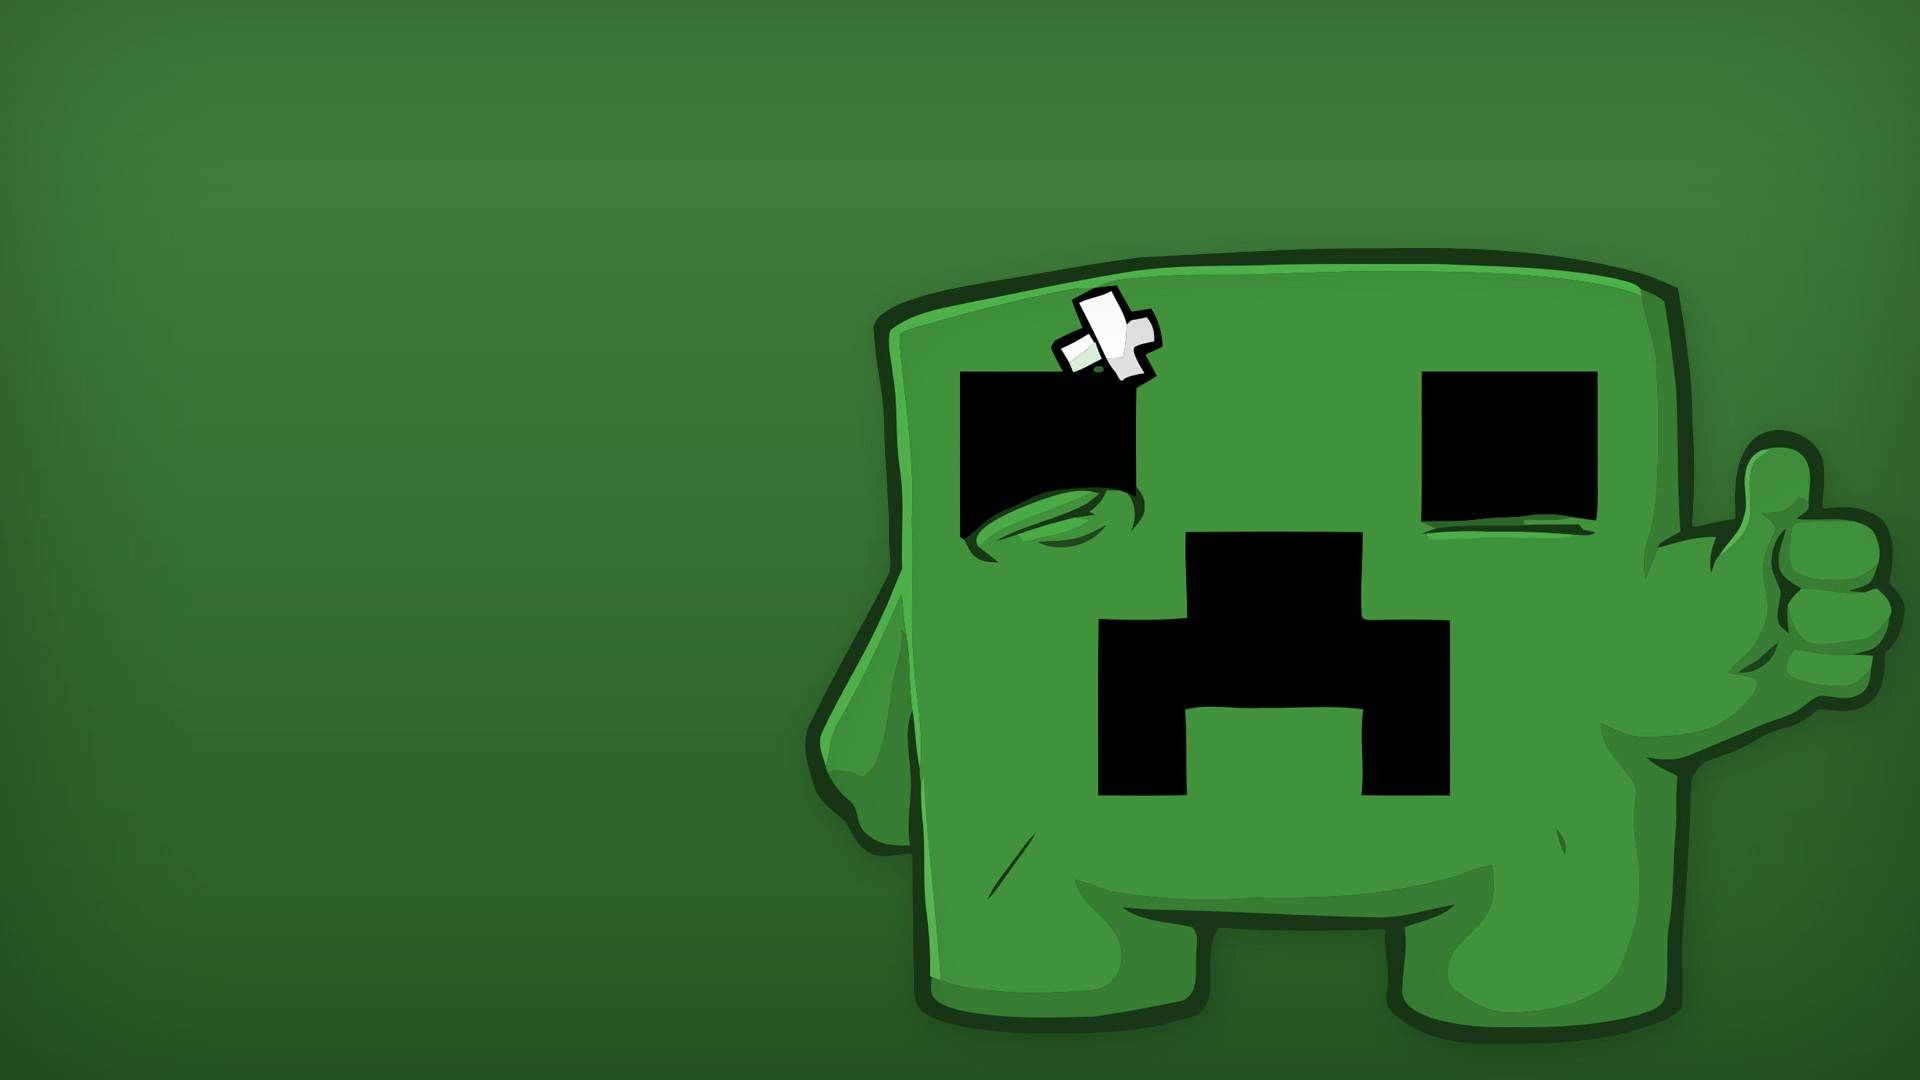 Gallery For Gt Cute Creeper Wallpaper